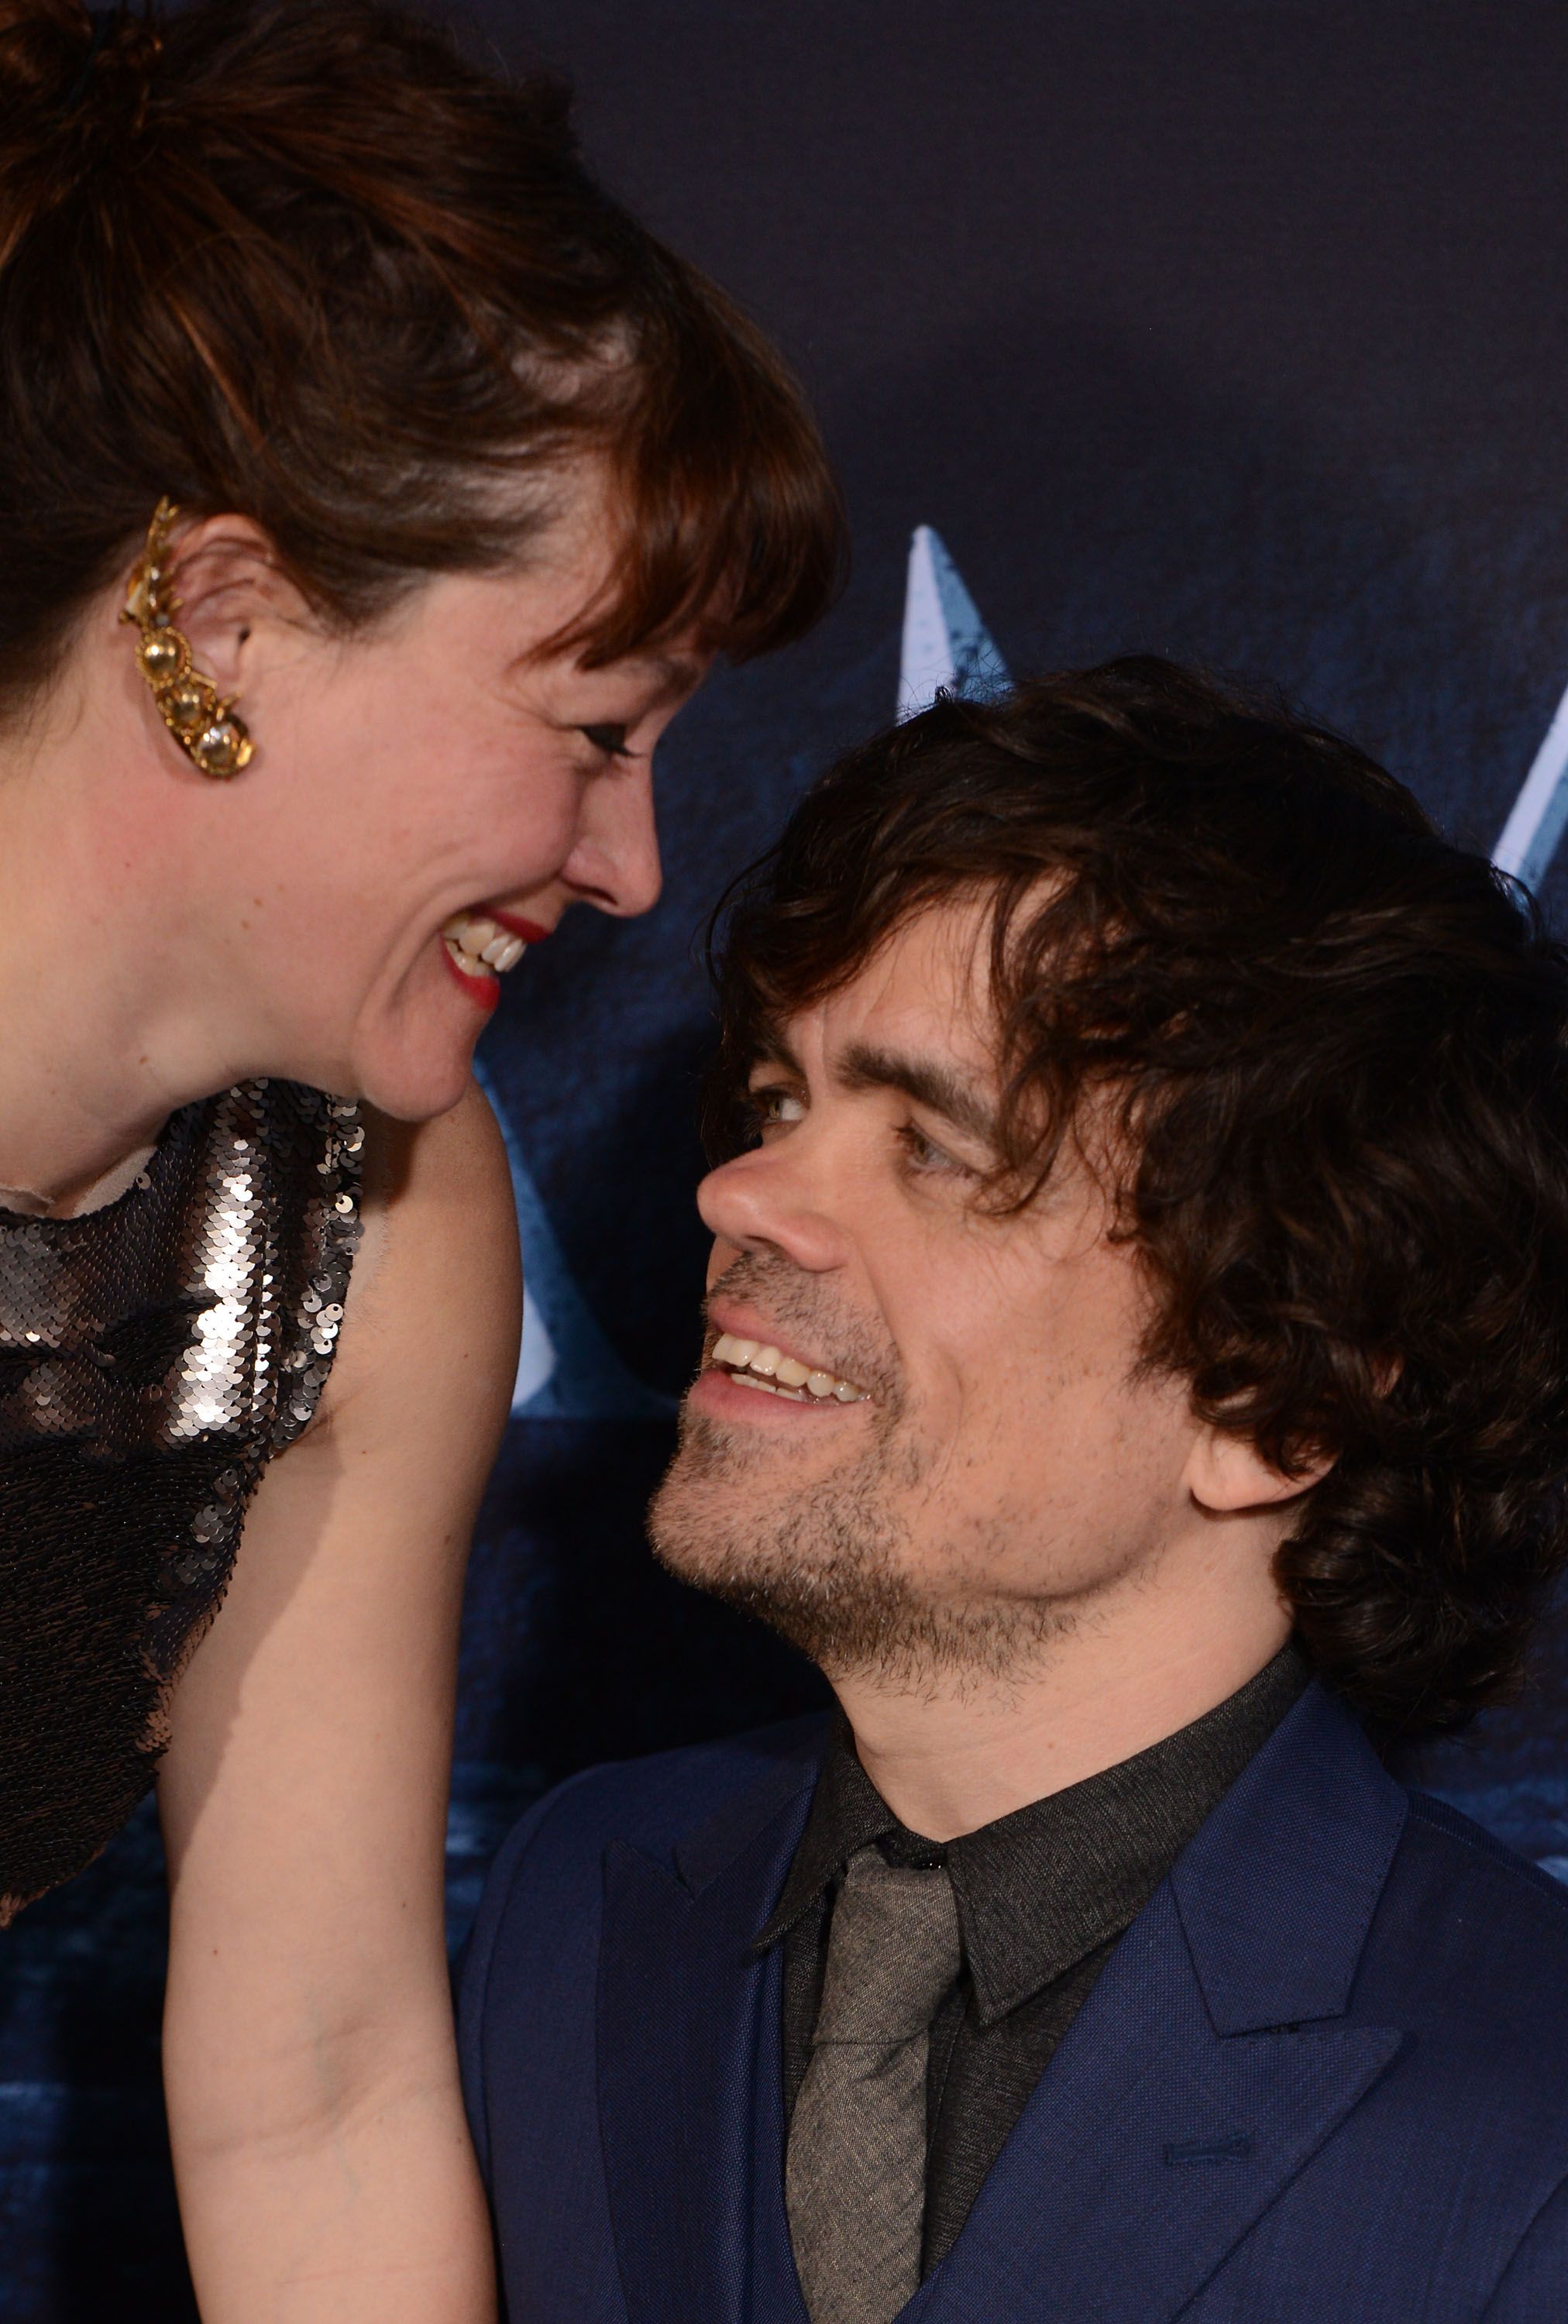 Peter Dinklage and Erica Schmidt at the premiere of HBO's 'Game Of Thrones' Season 6 in 2016 in Hollywood, California | Source: Getty Images